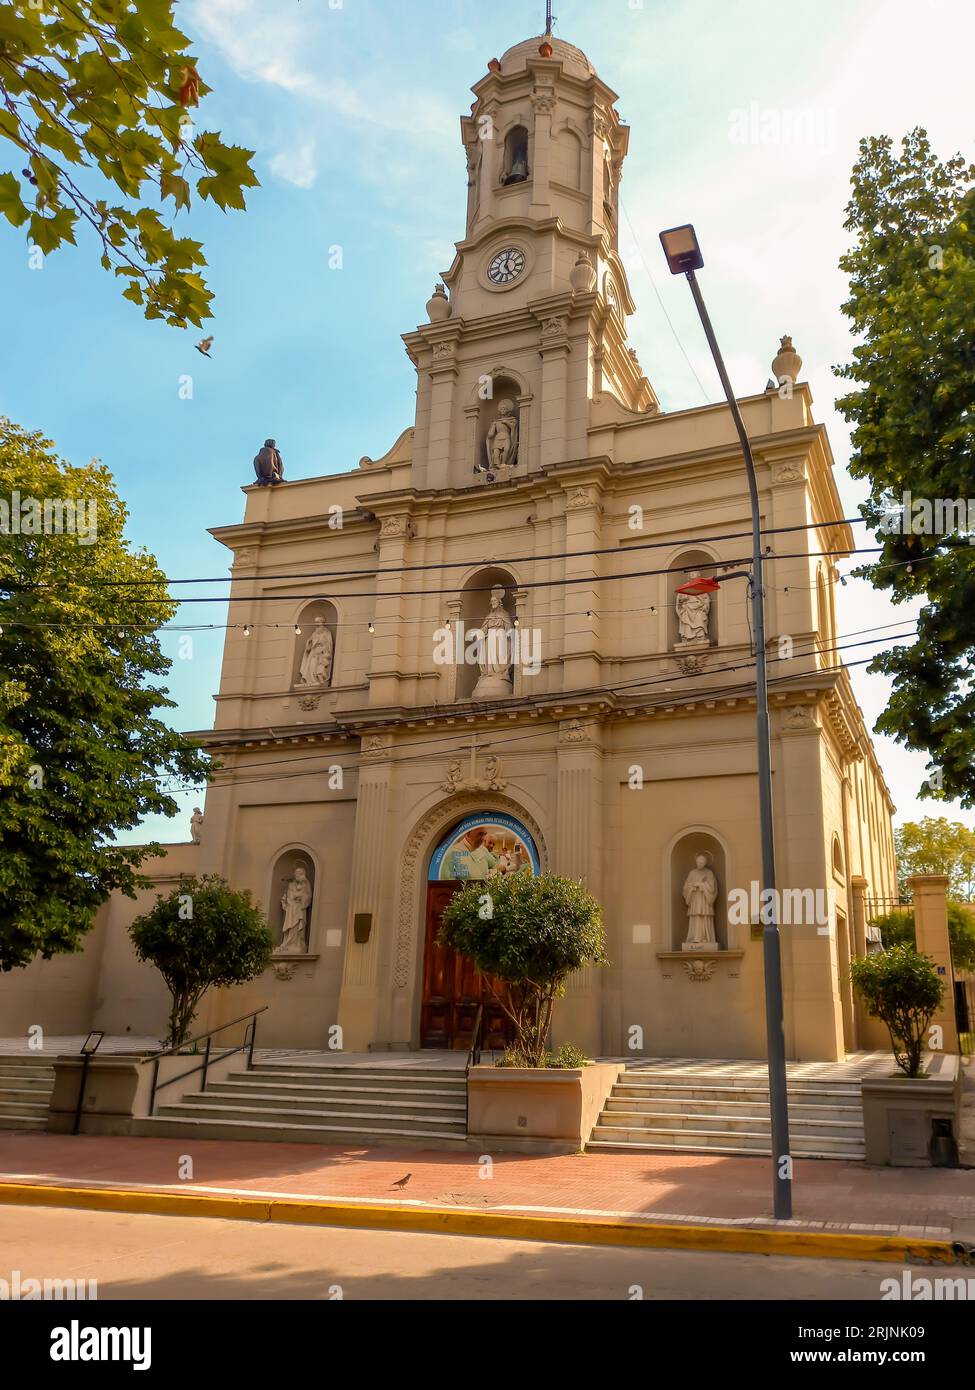 Exaltation of the Holy Cross Parish church in Capilla del Senor, Buenos Aires, Argentina, built in 1866 in eclectic style Stock Photo